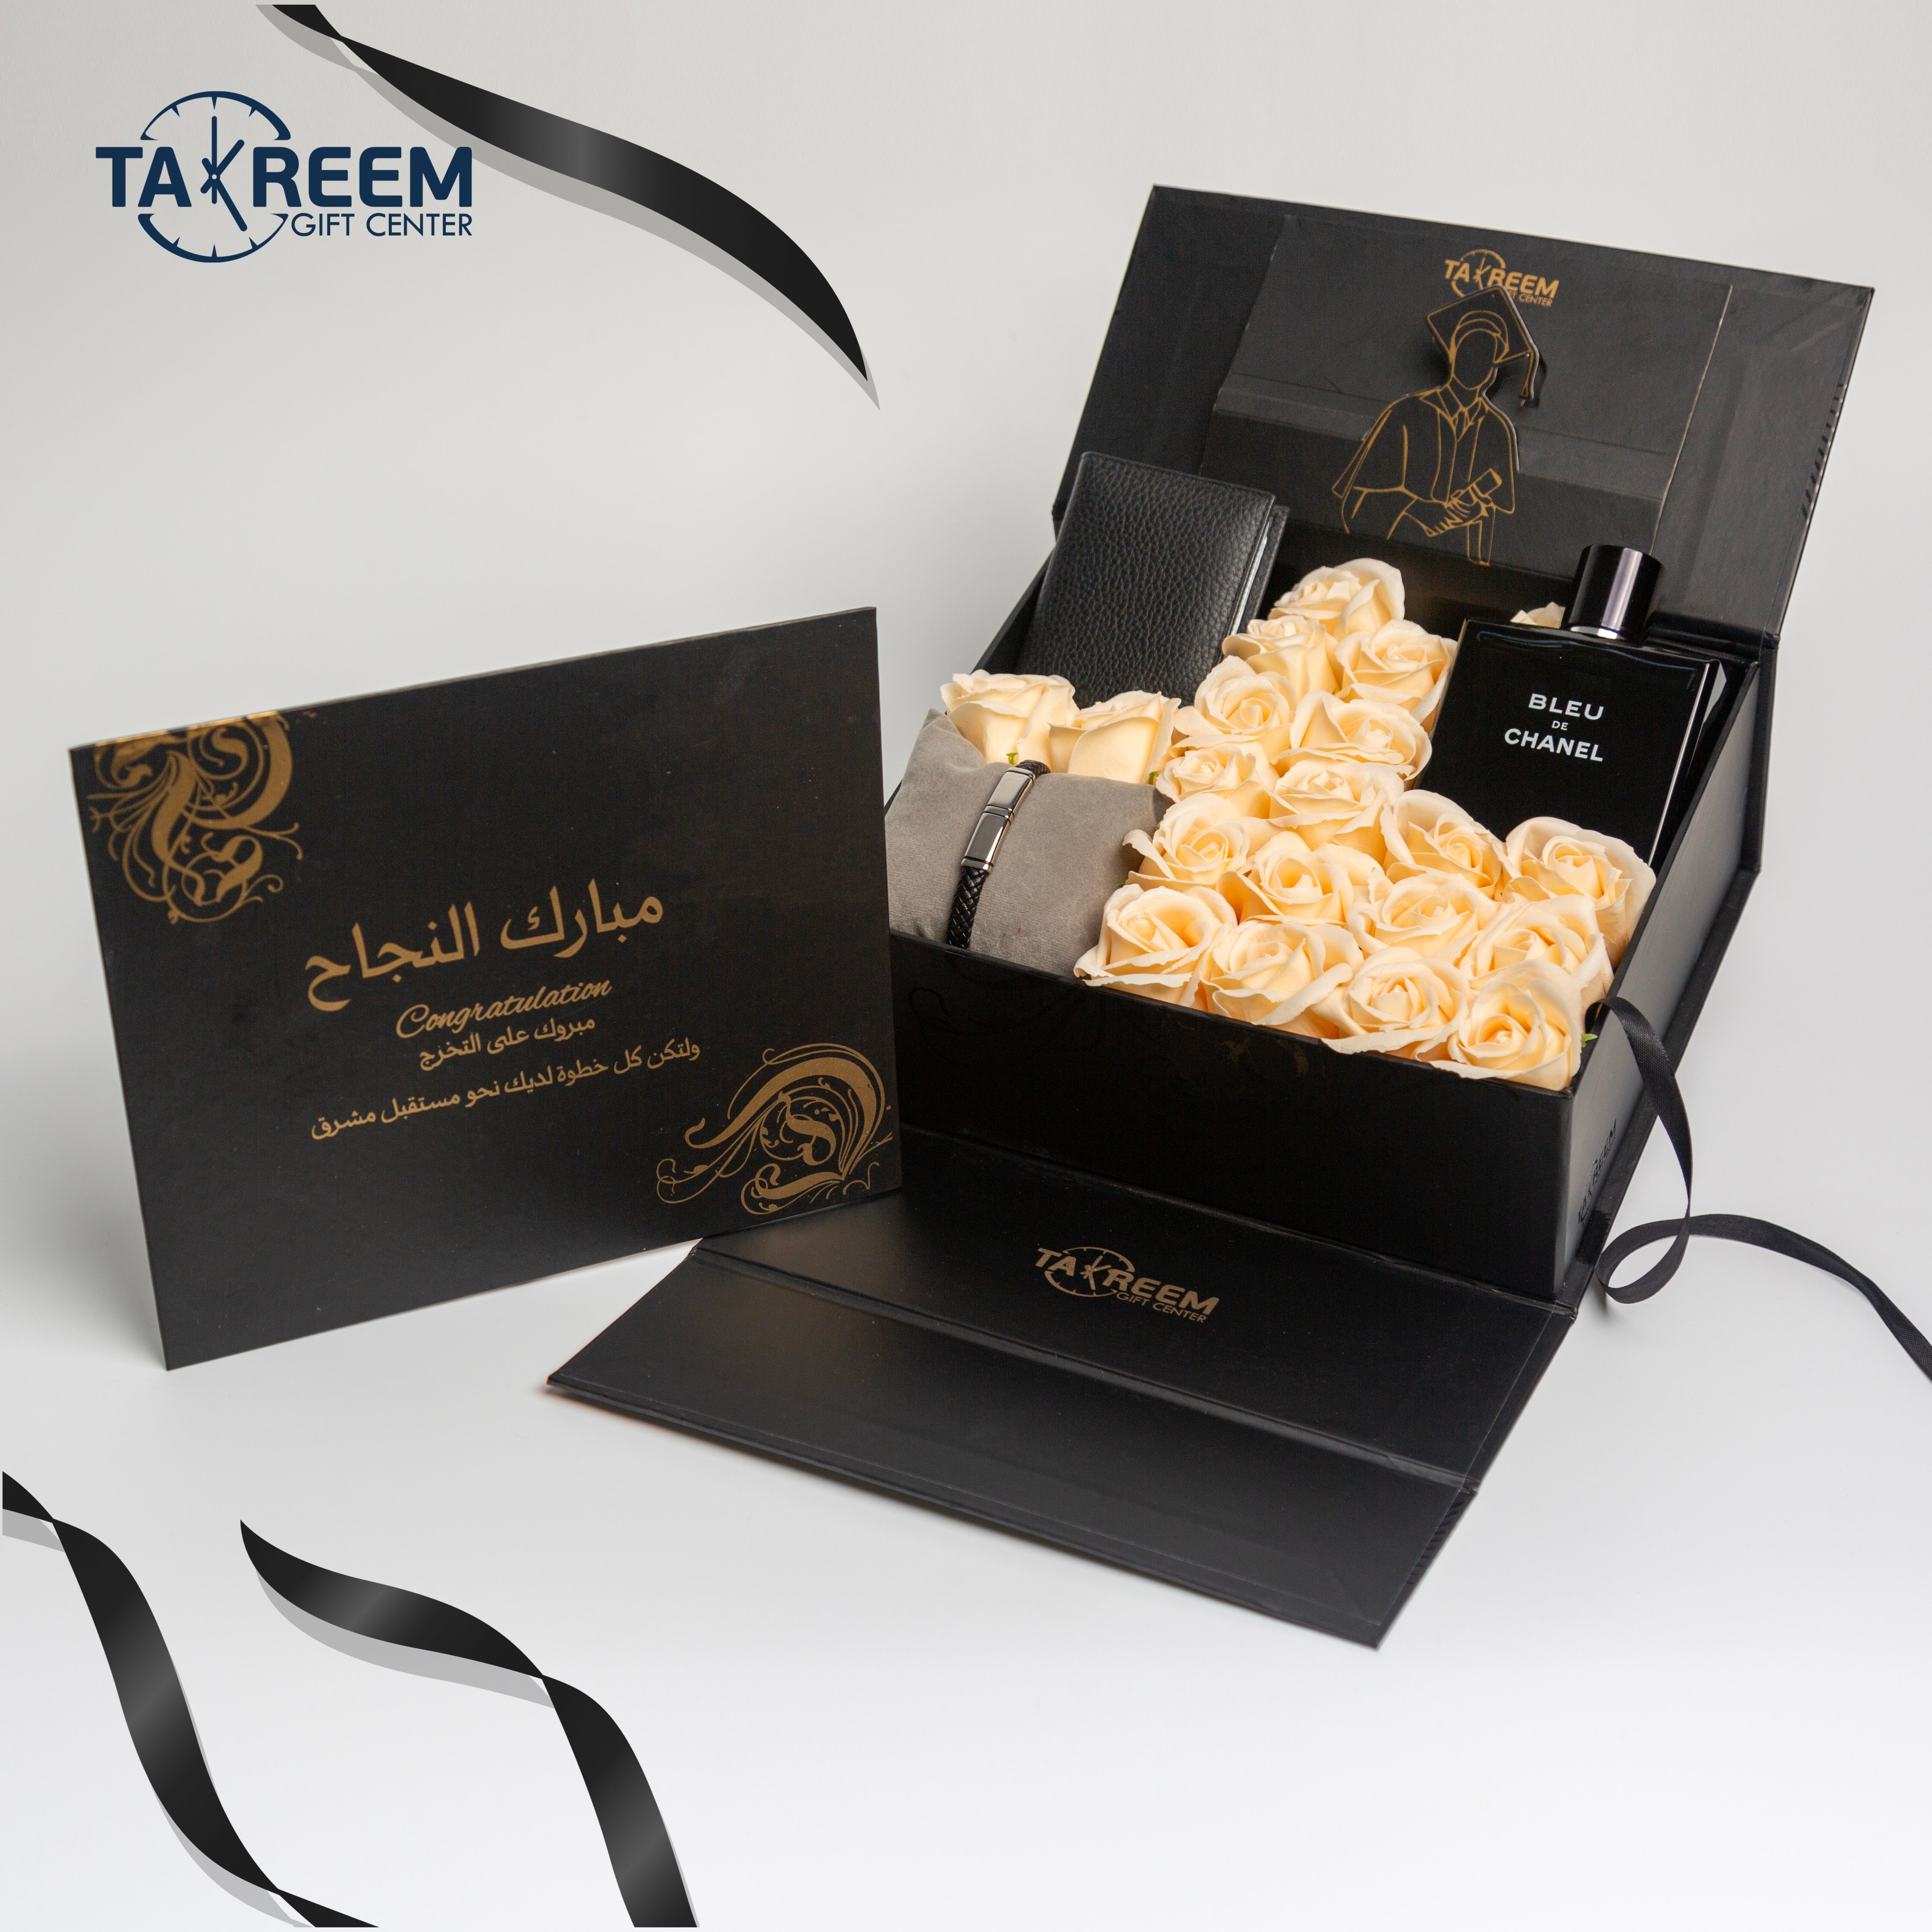 Big Gold5 Gift Boxes By Takreem Gifts Center